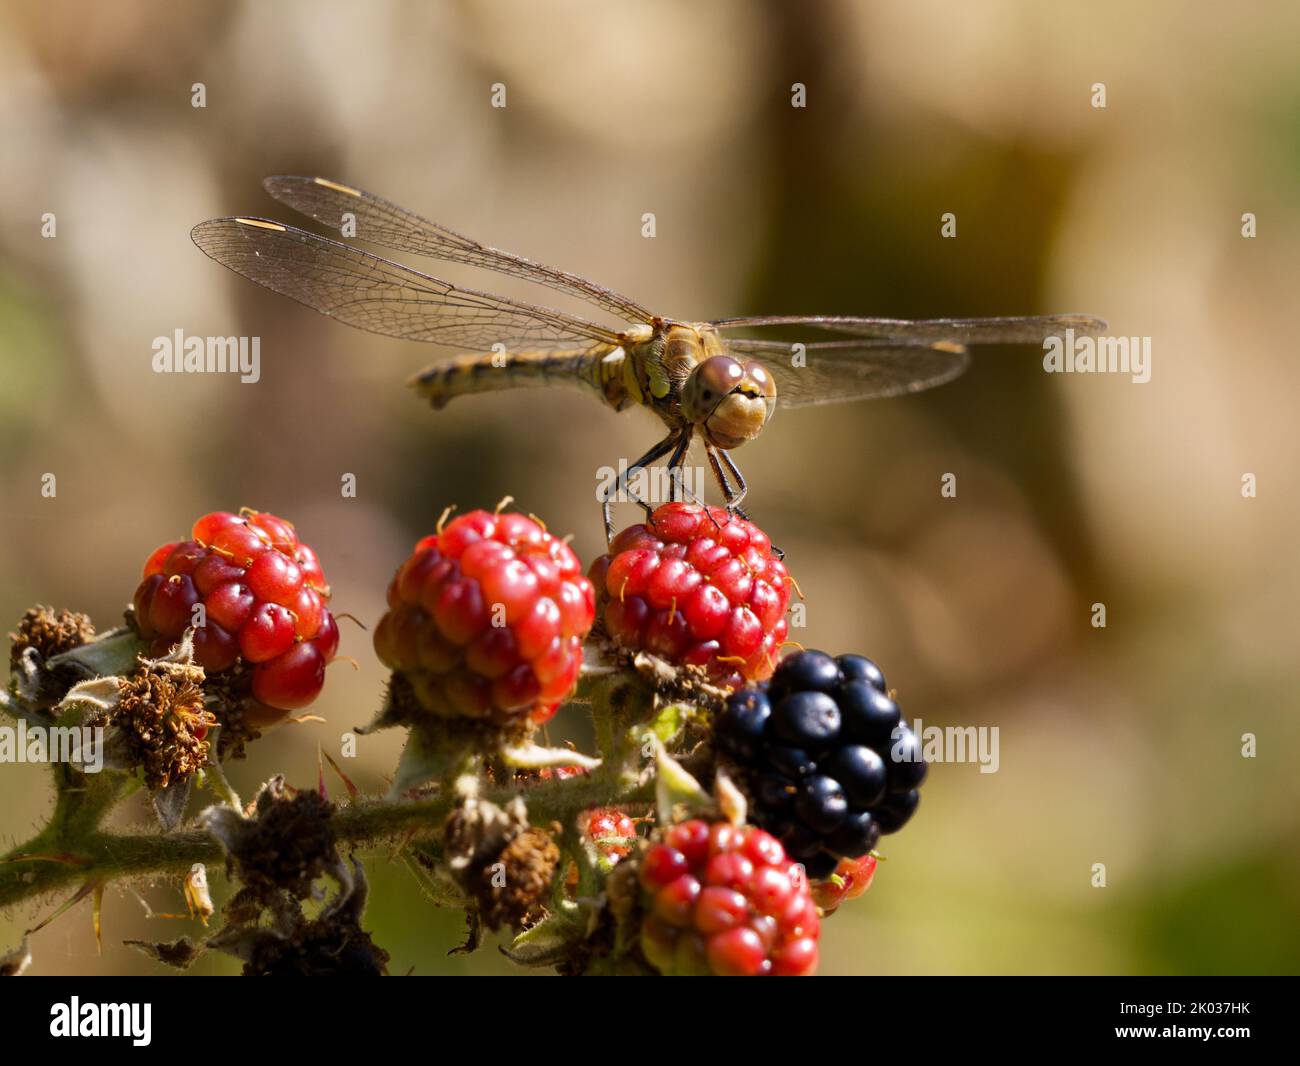 Female Common Darter dragonfly (Sympetrum striolatum) perched on blackberries Stock Photo